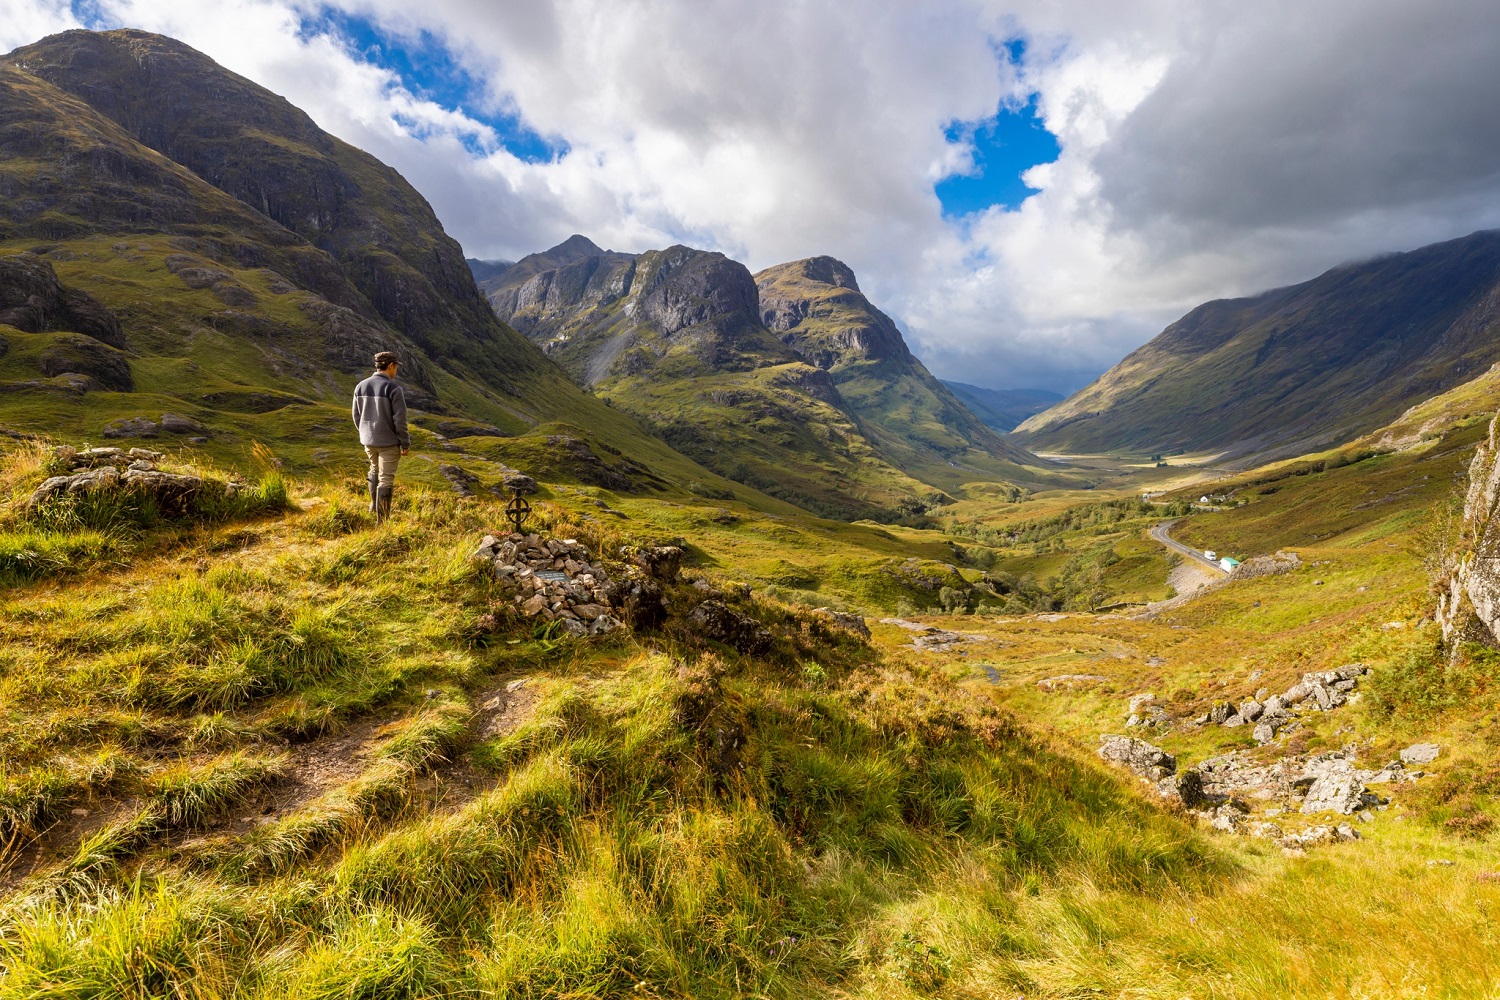 The Pass of Glencoe is a deep gorge cut by the River Coe and surrounded by towering mountains, geology and history.